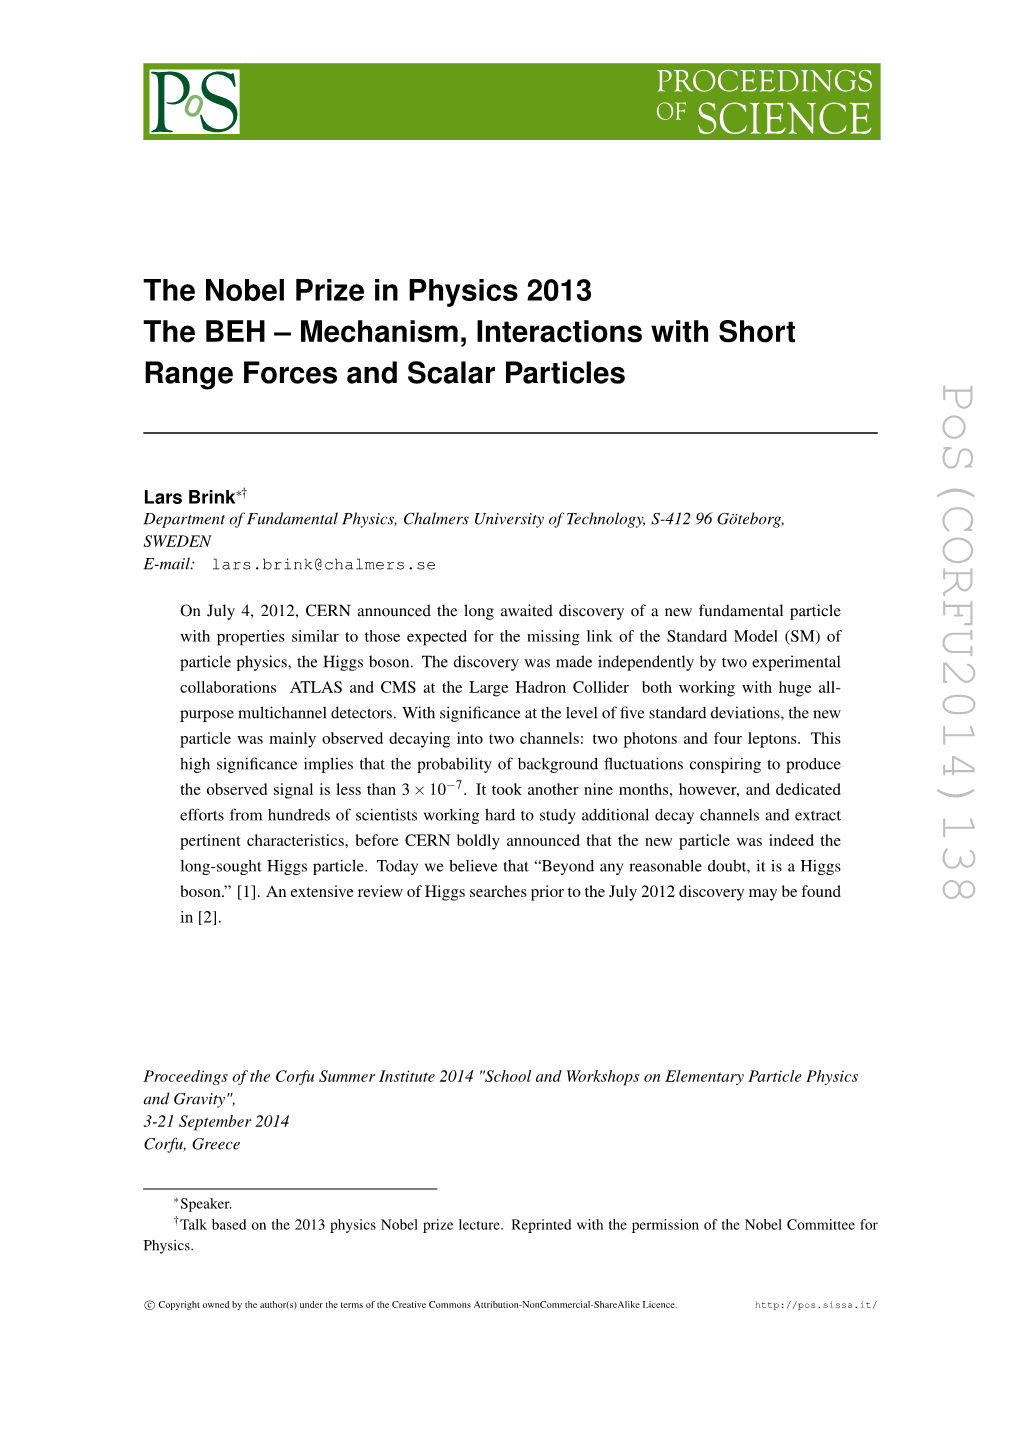 The Nobel Prize in Physics 2013 the BEH–Mechanism, Interactions With